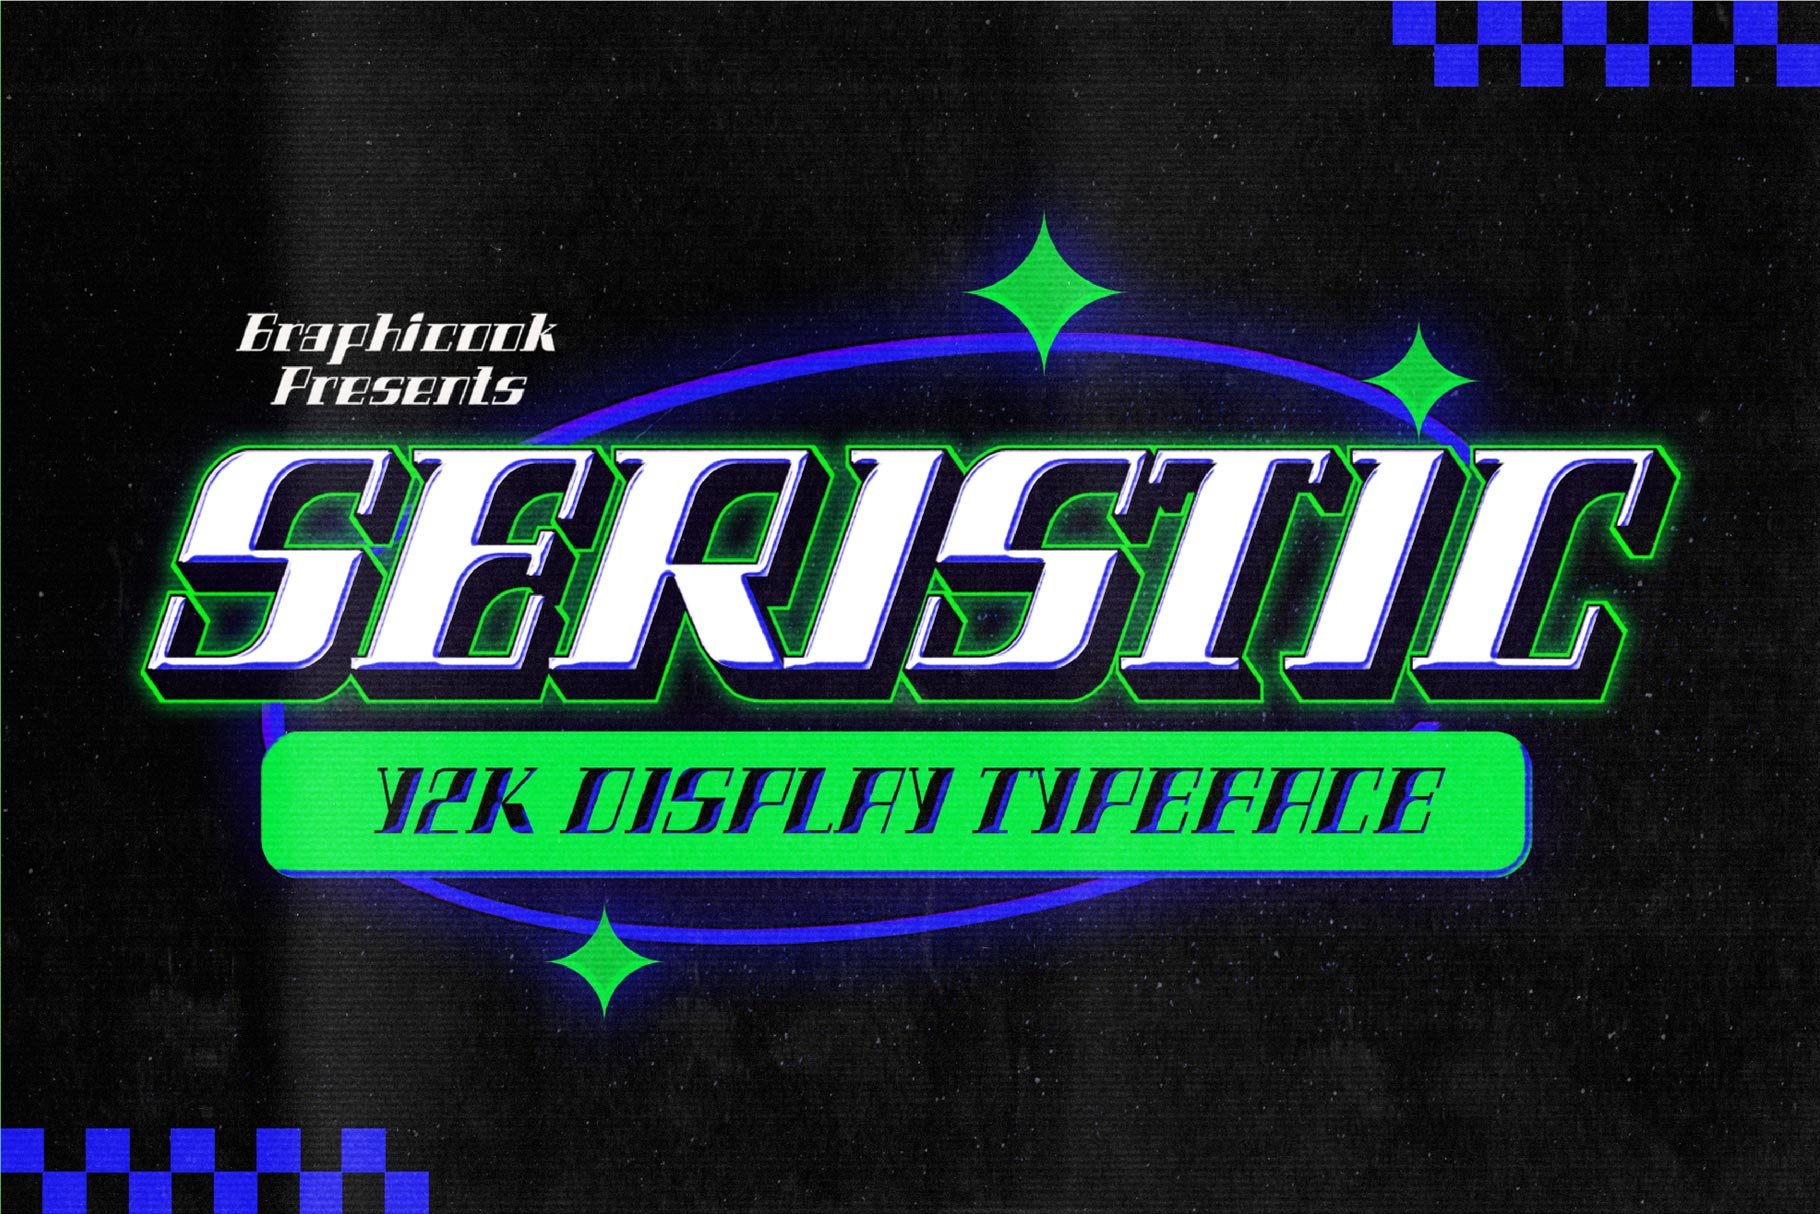 Seristic Y2K Display Typeface cover image.